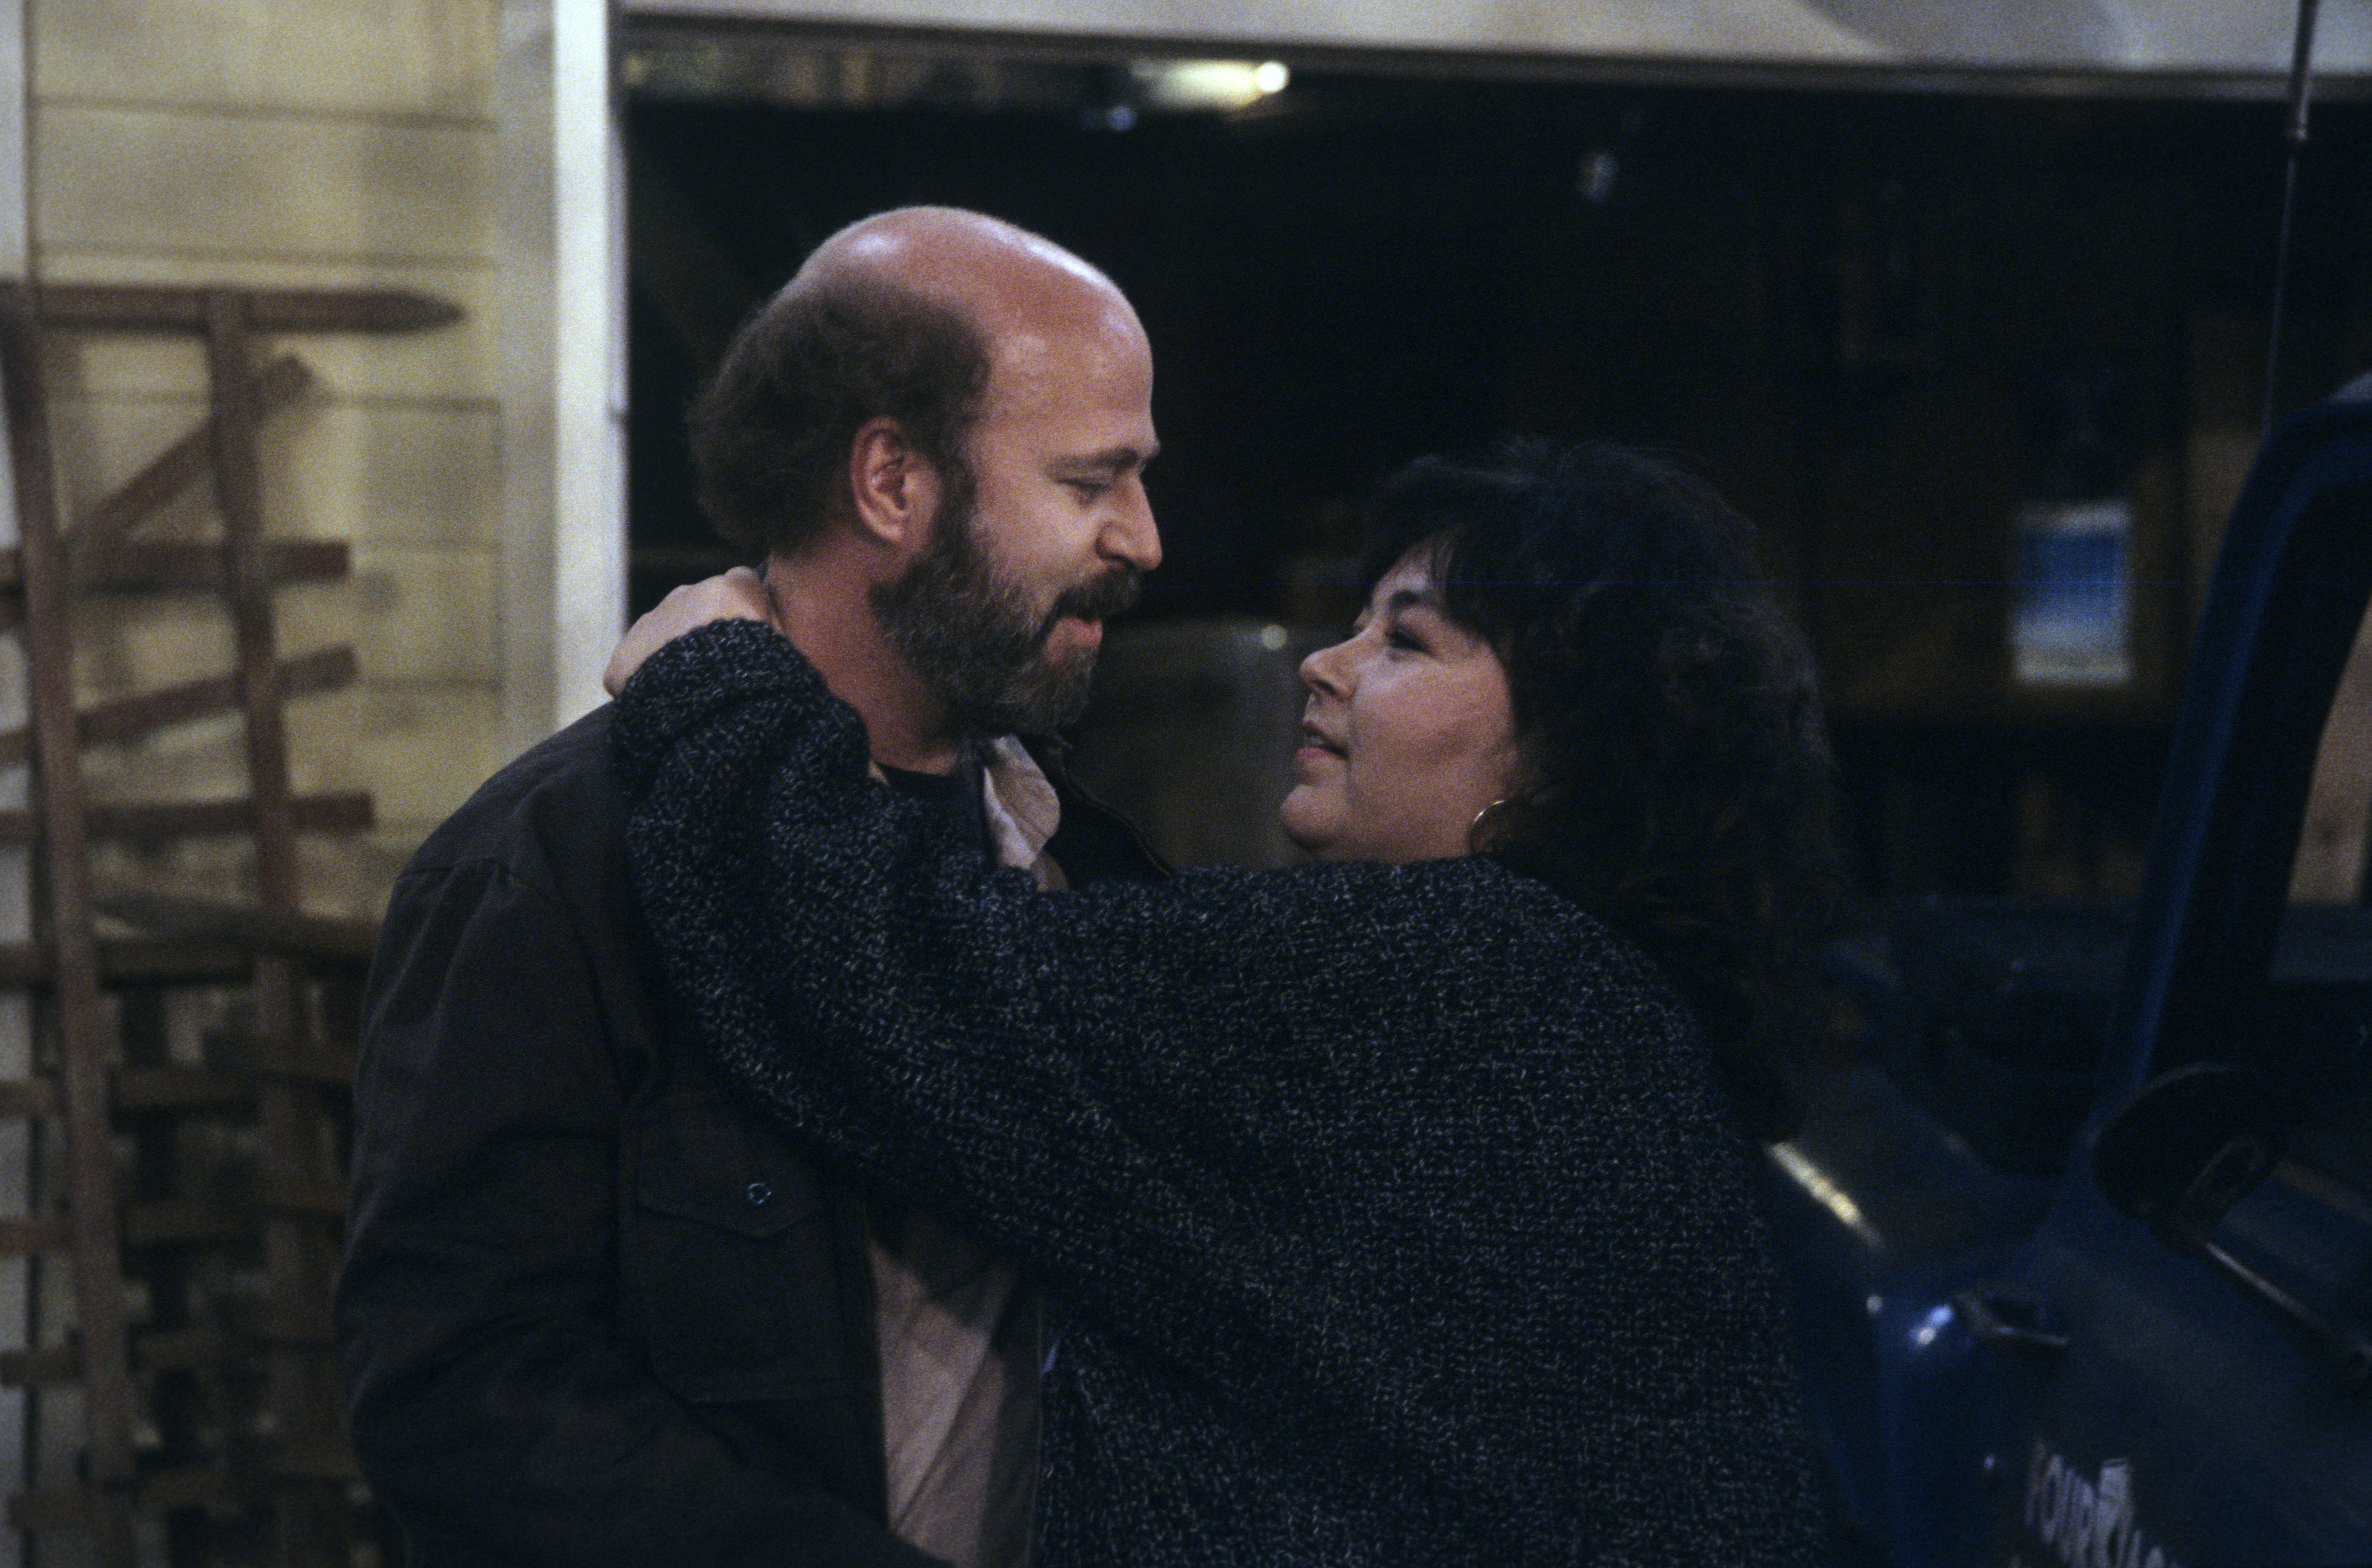 Bill Pentland and Roseanne Barr in 1988 | Source: Getty Images